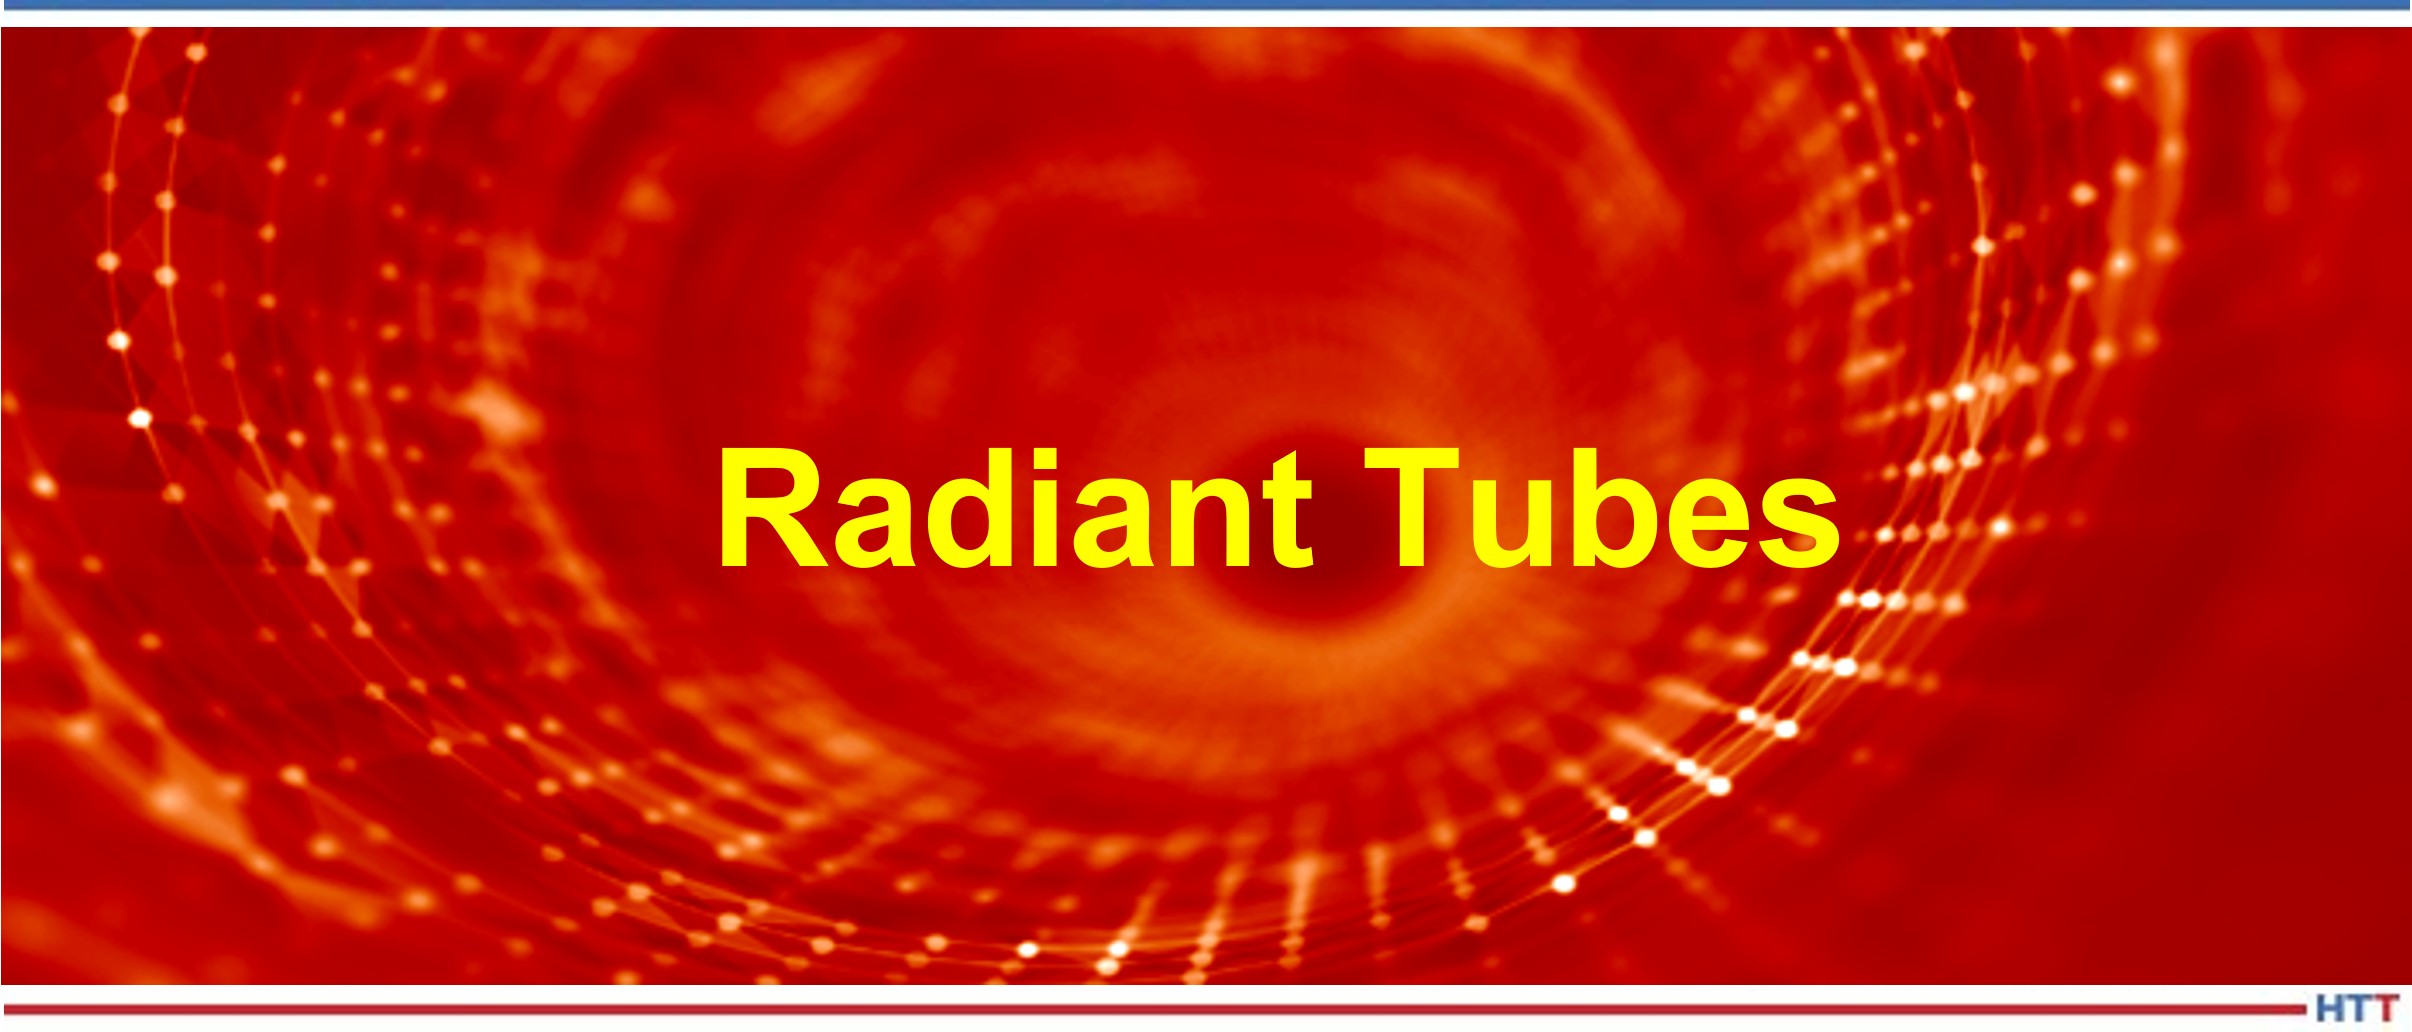 Improve Your Use of Radiant Tubes